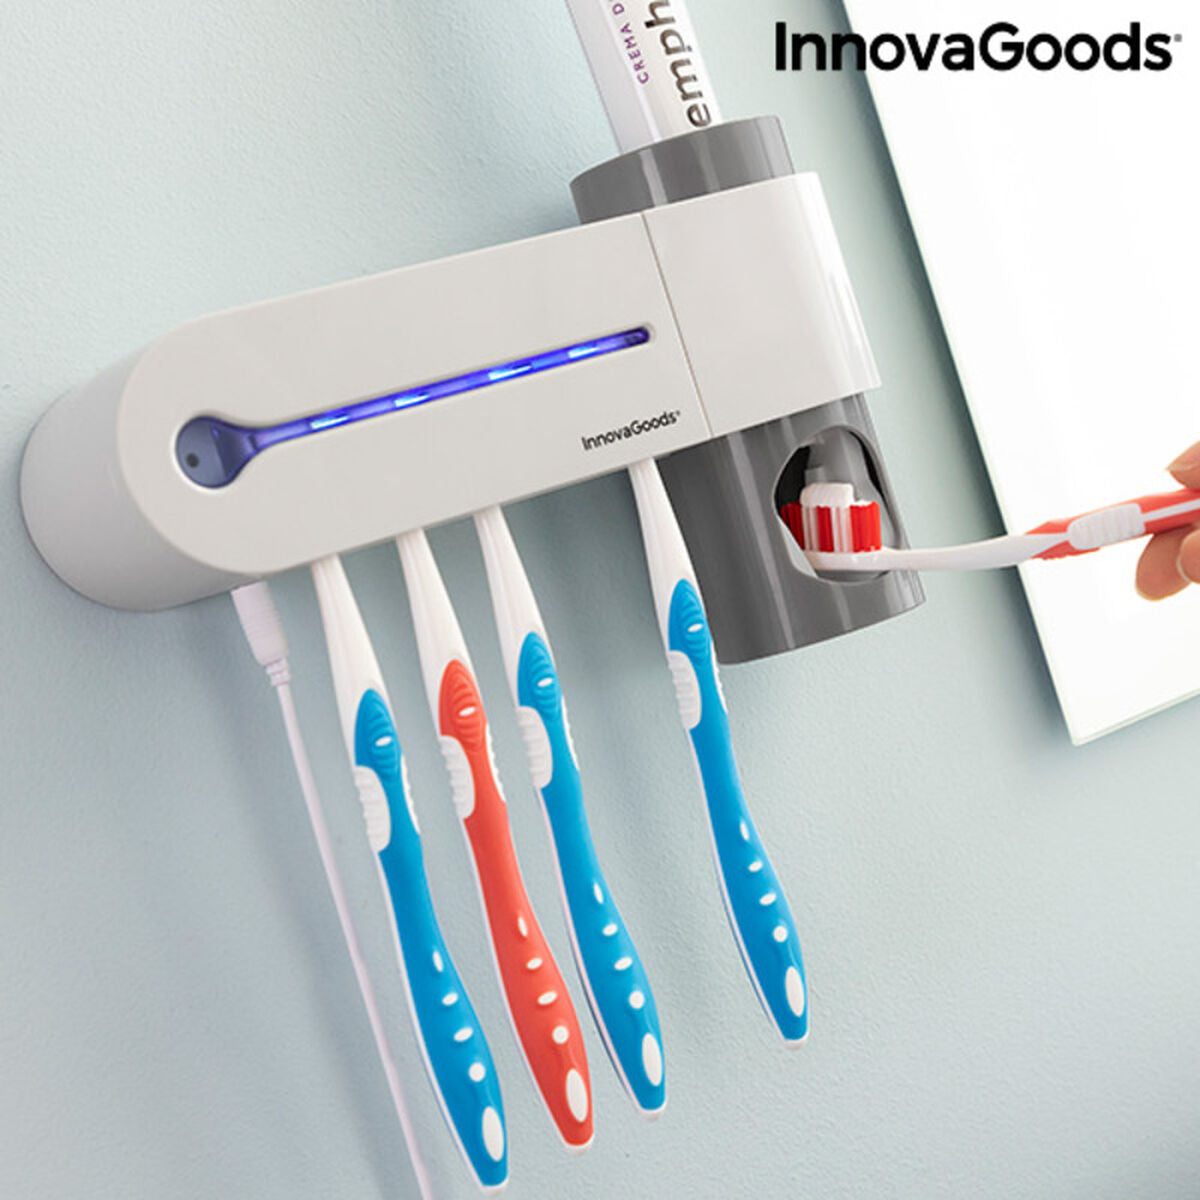 UV Toothbrush Steriliser with Stand and Toothpaste Dispenser Smiluv InnovaGoods White (Refurbished B)